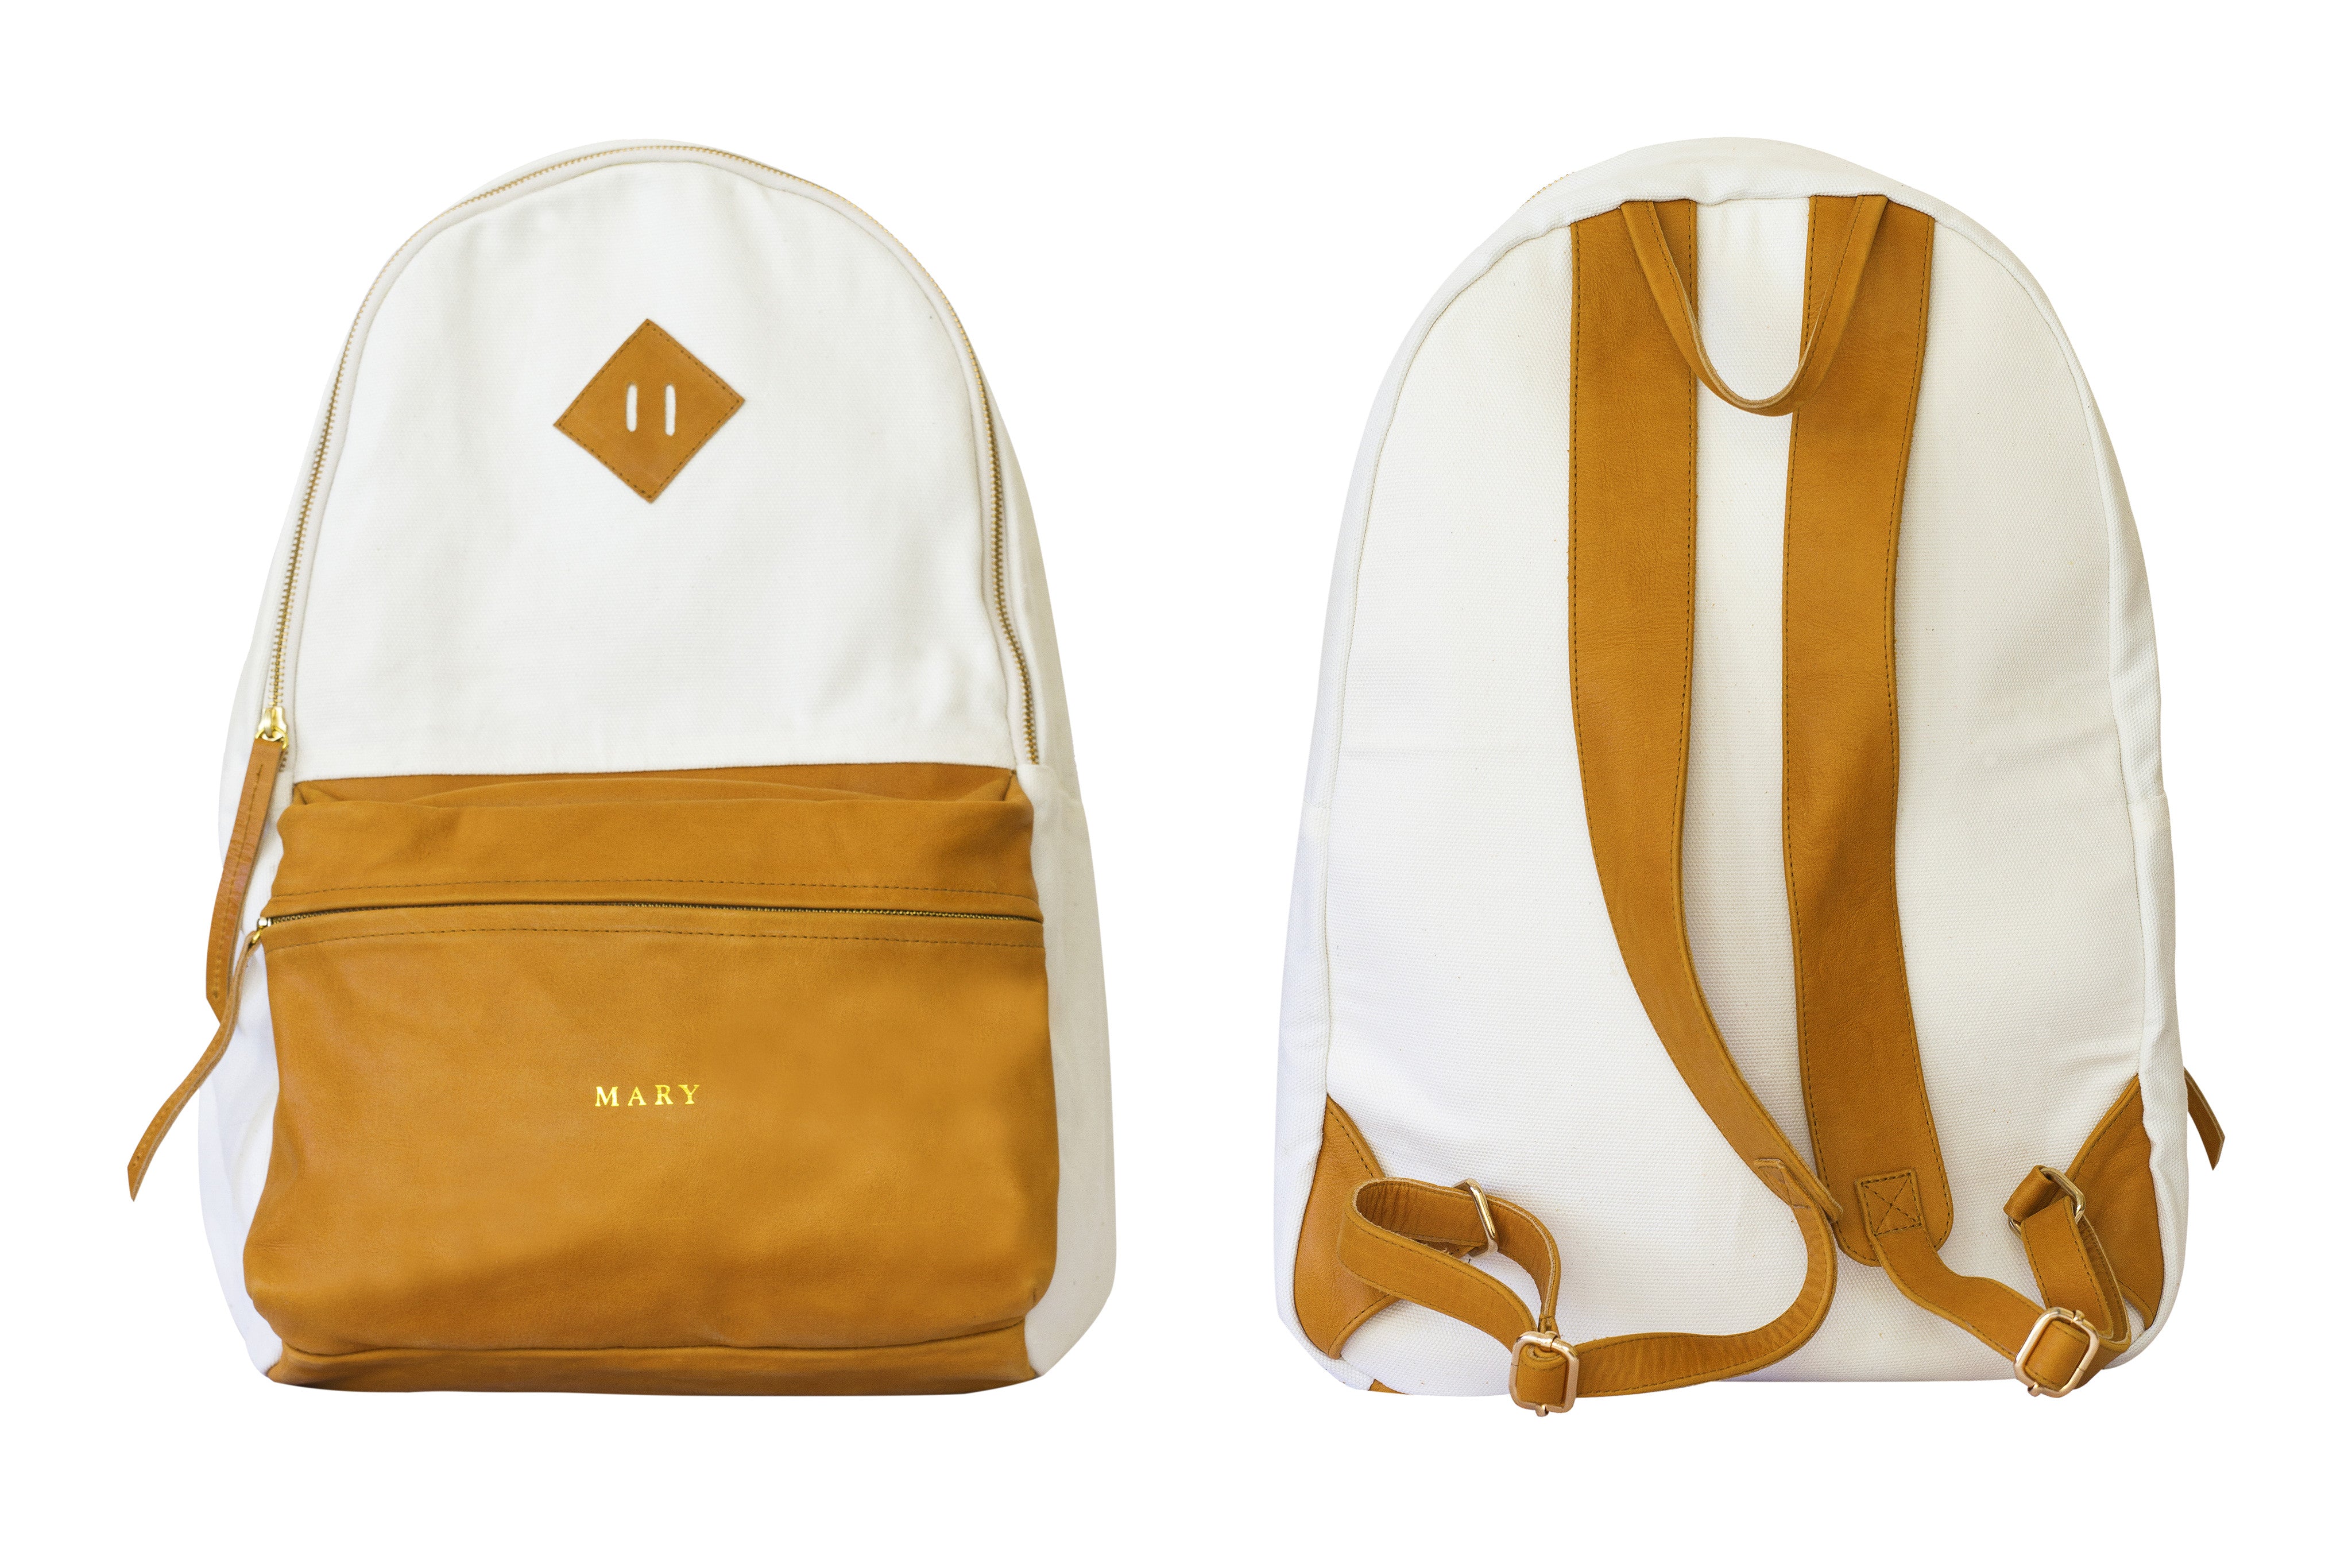 backpack; women's backpack; bags and purses; leather backpack; backpack for everyone; canvas backpack; monogram backpack; backpack for women; women's backpack; laptop backpack; travel backpack; monogram backpack; personalized backpack; 